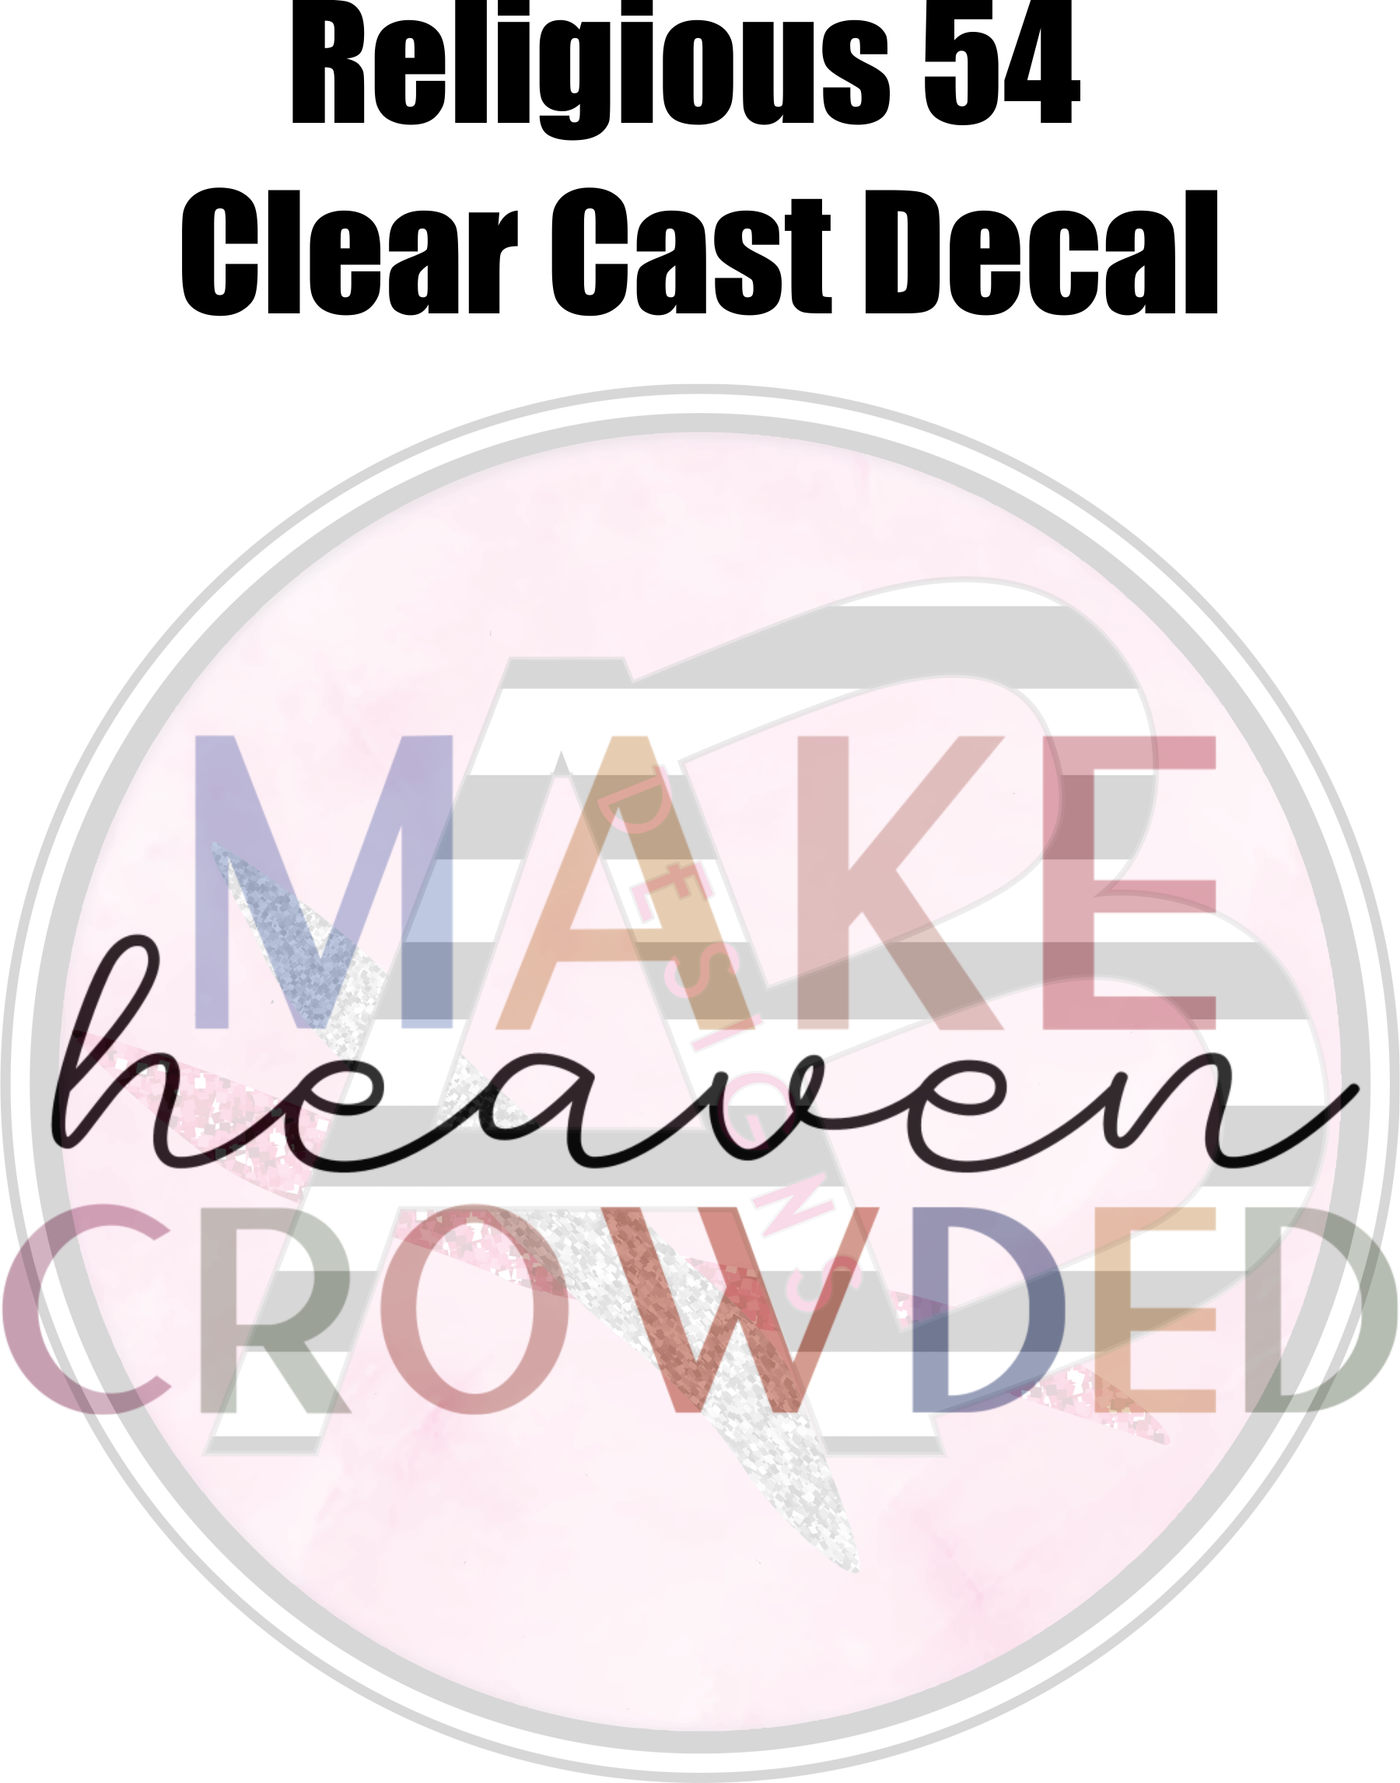 Religious 54 - Clear Cast Decal